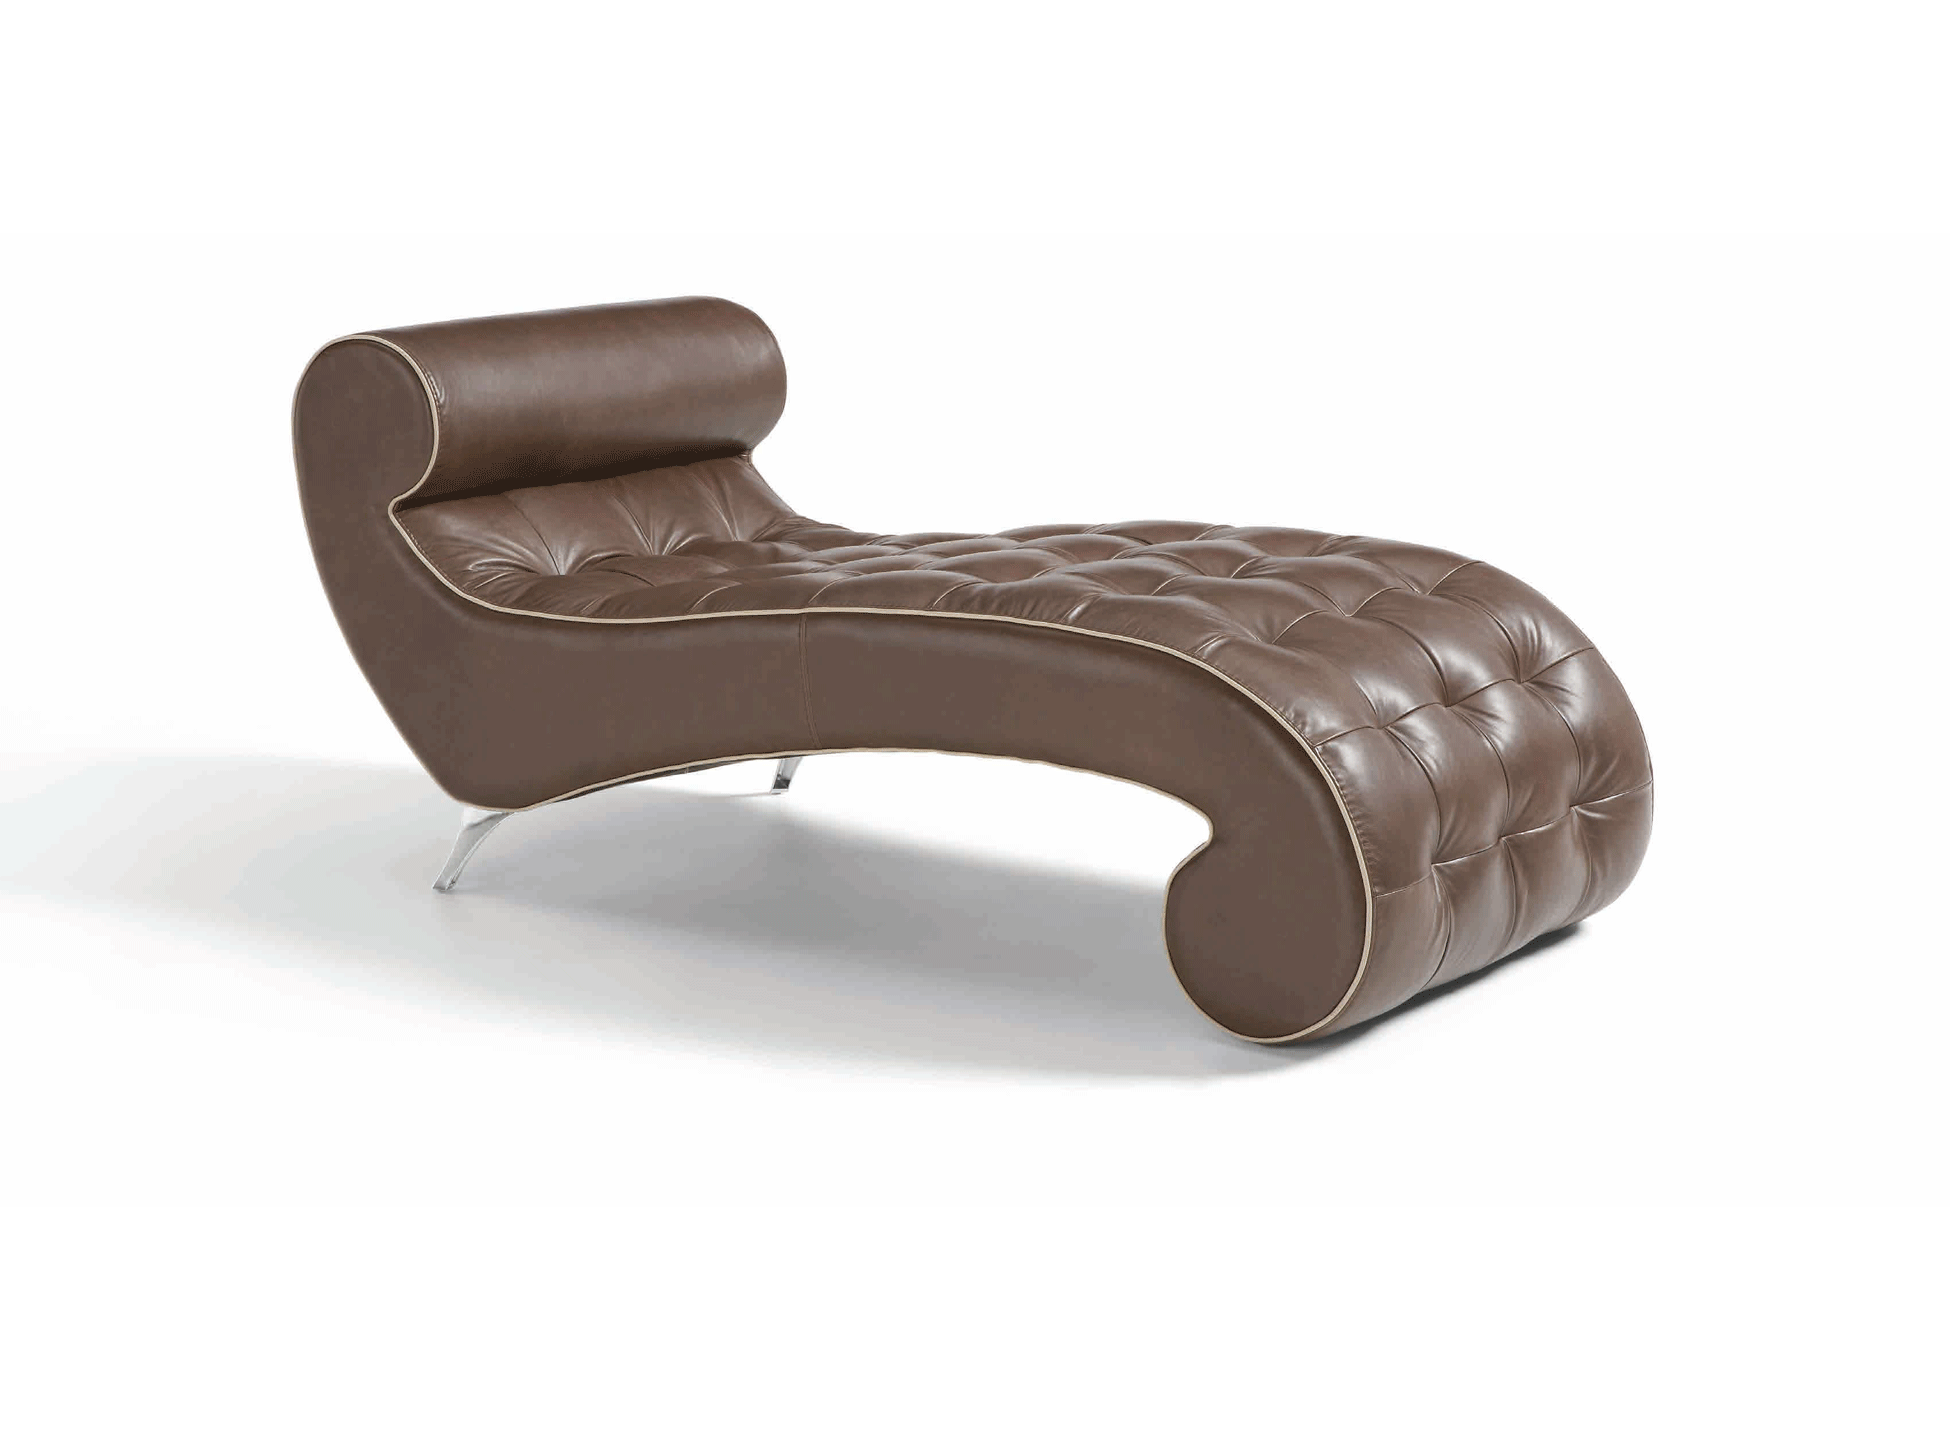 Living Room Furniture Reclining and Sliding Seats Sets Barcellona lounging Chair